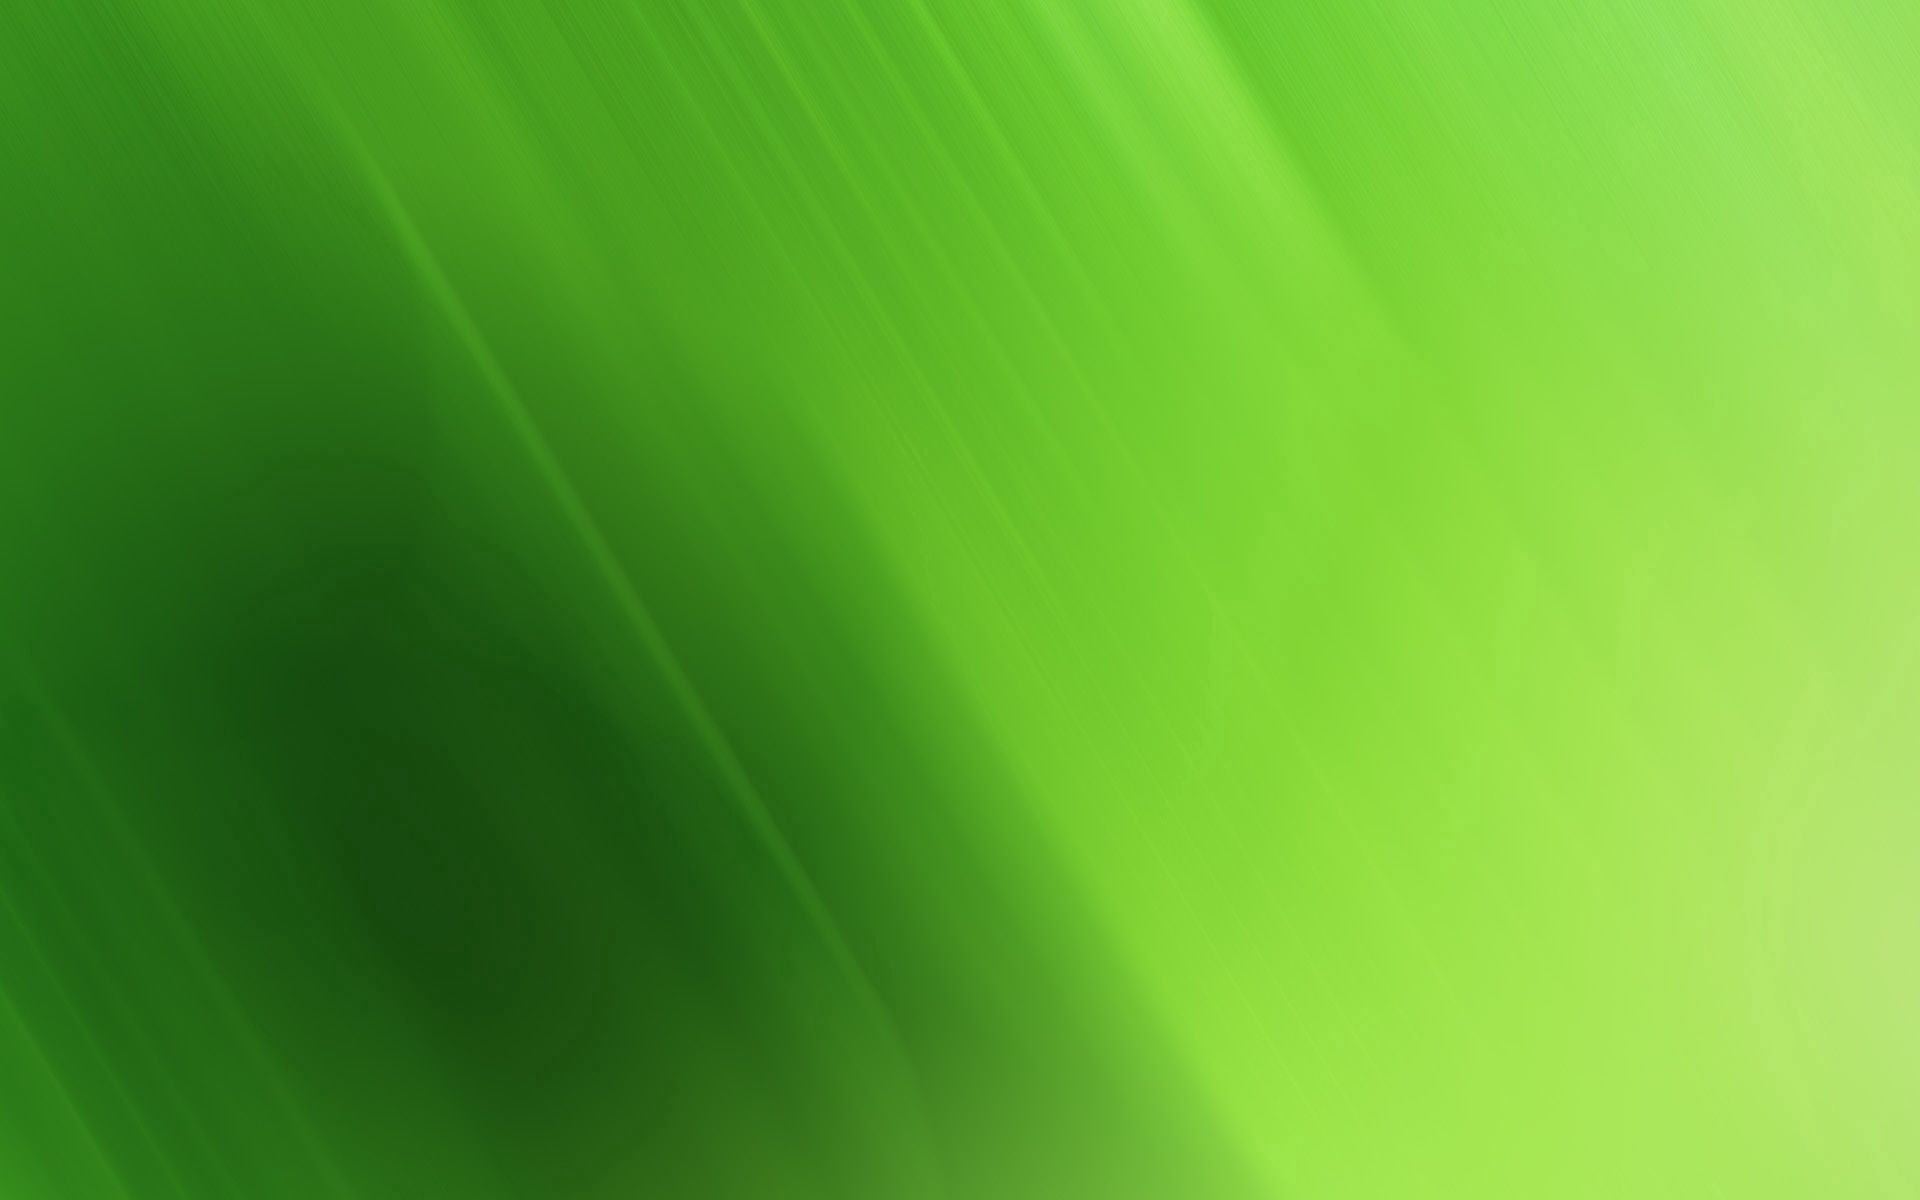 85661 download wallpaper solid, abstract, green, bright, matt, mat screensavers and pictures for free